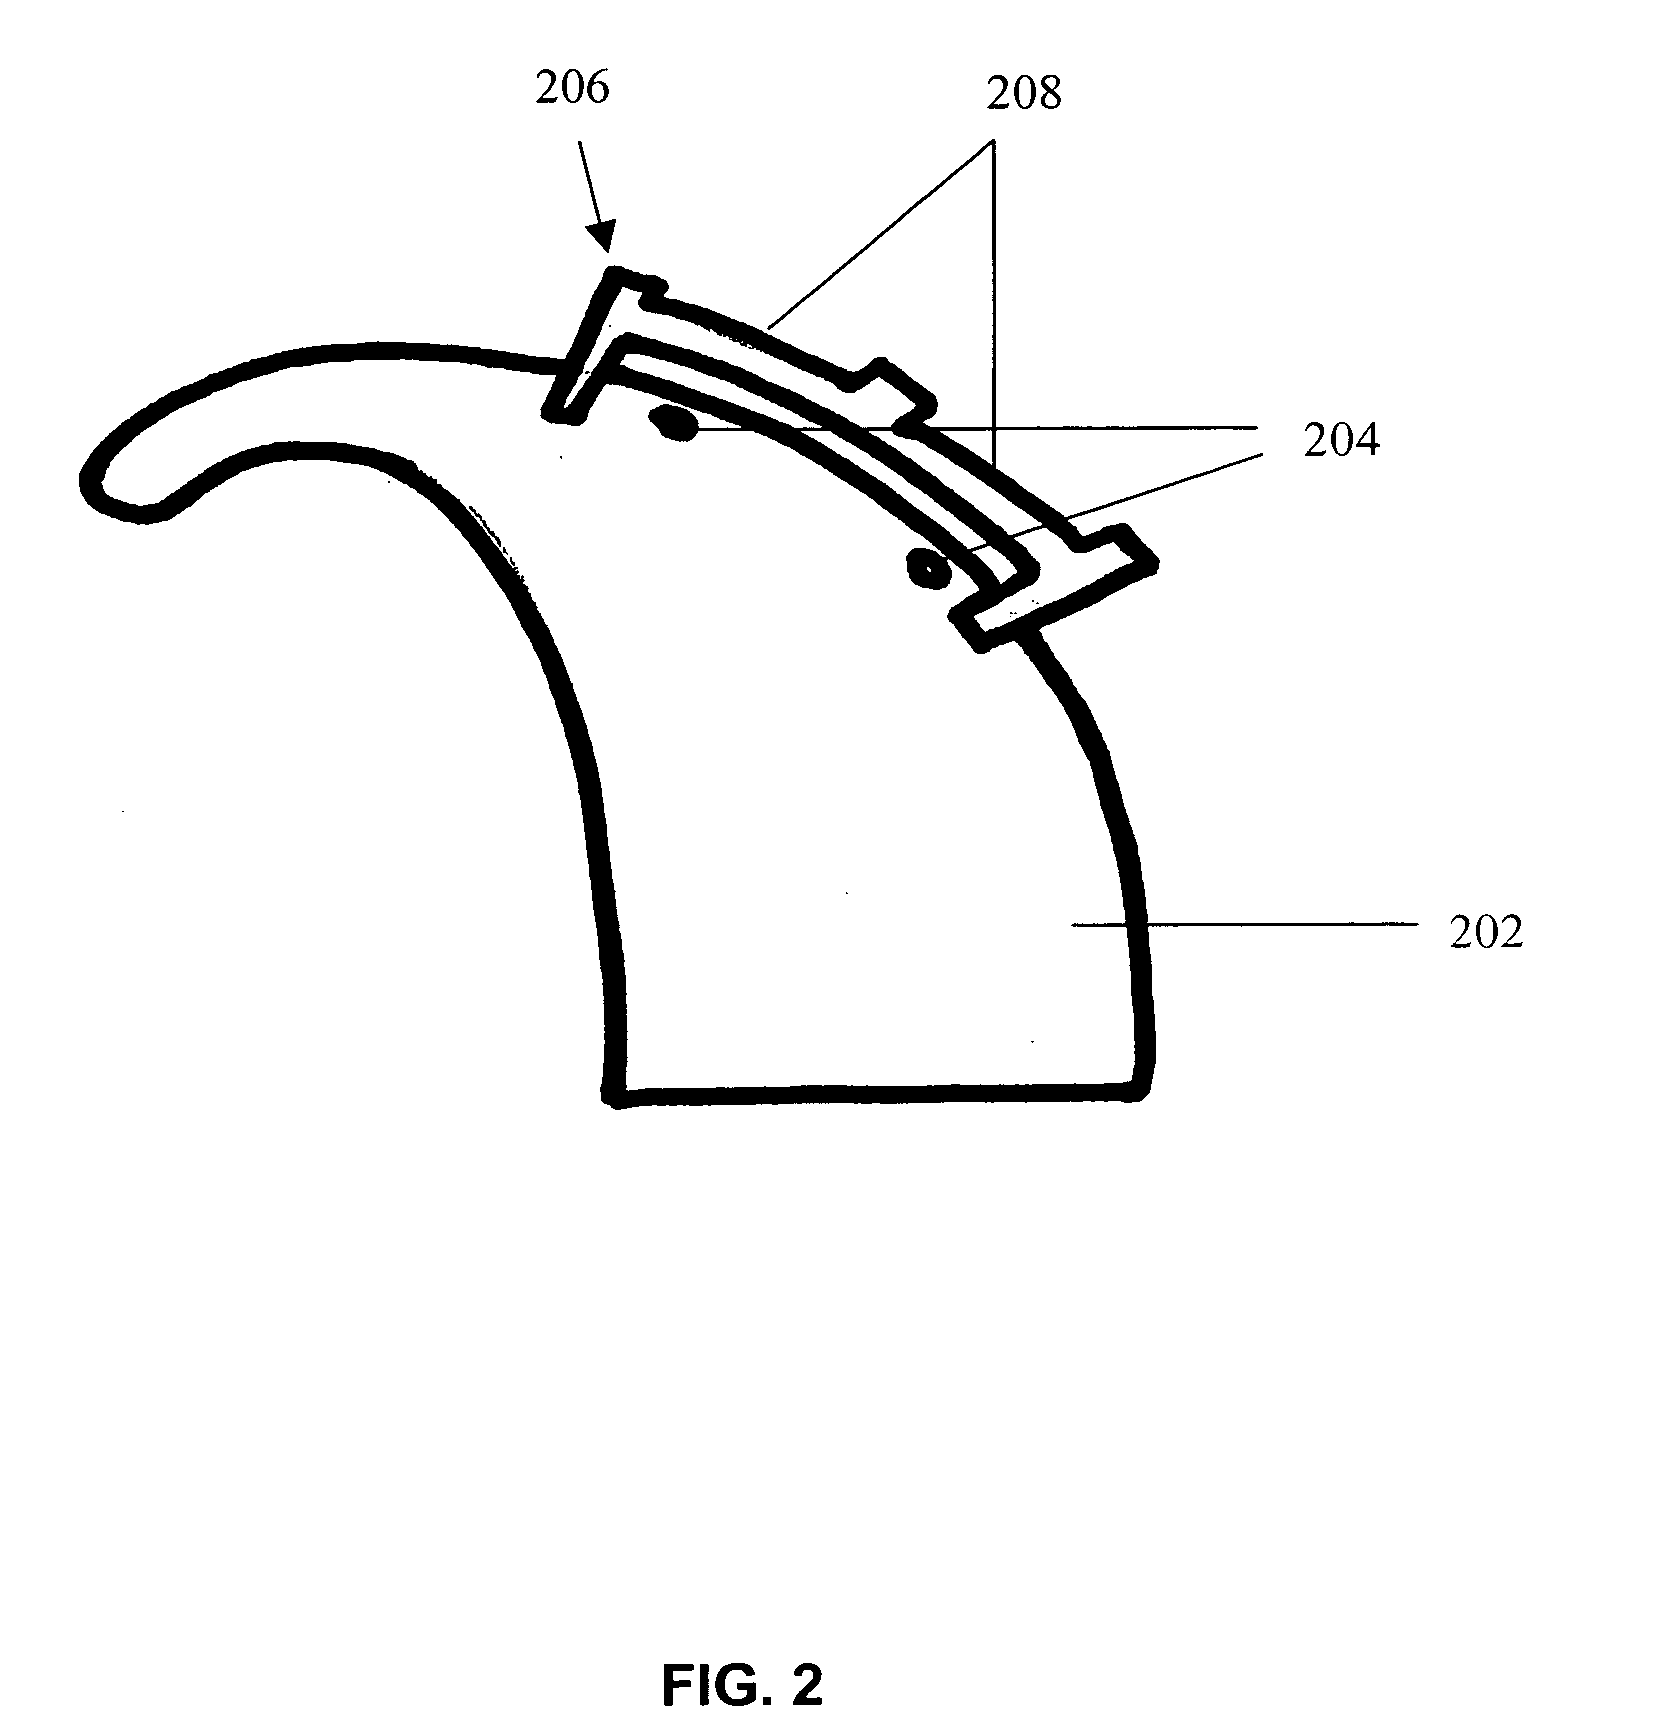 Stand-alone microphone test system for a hearing device